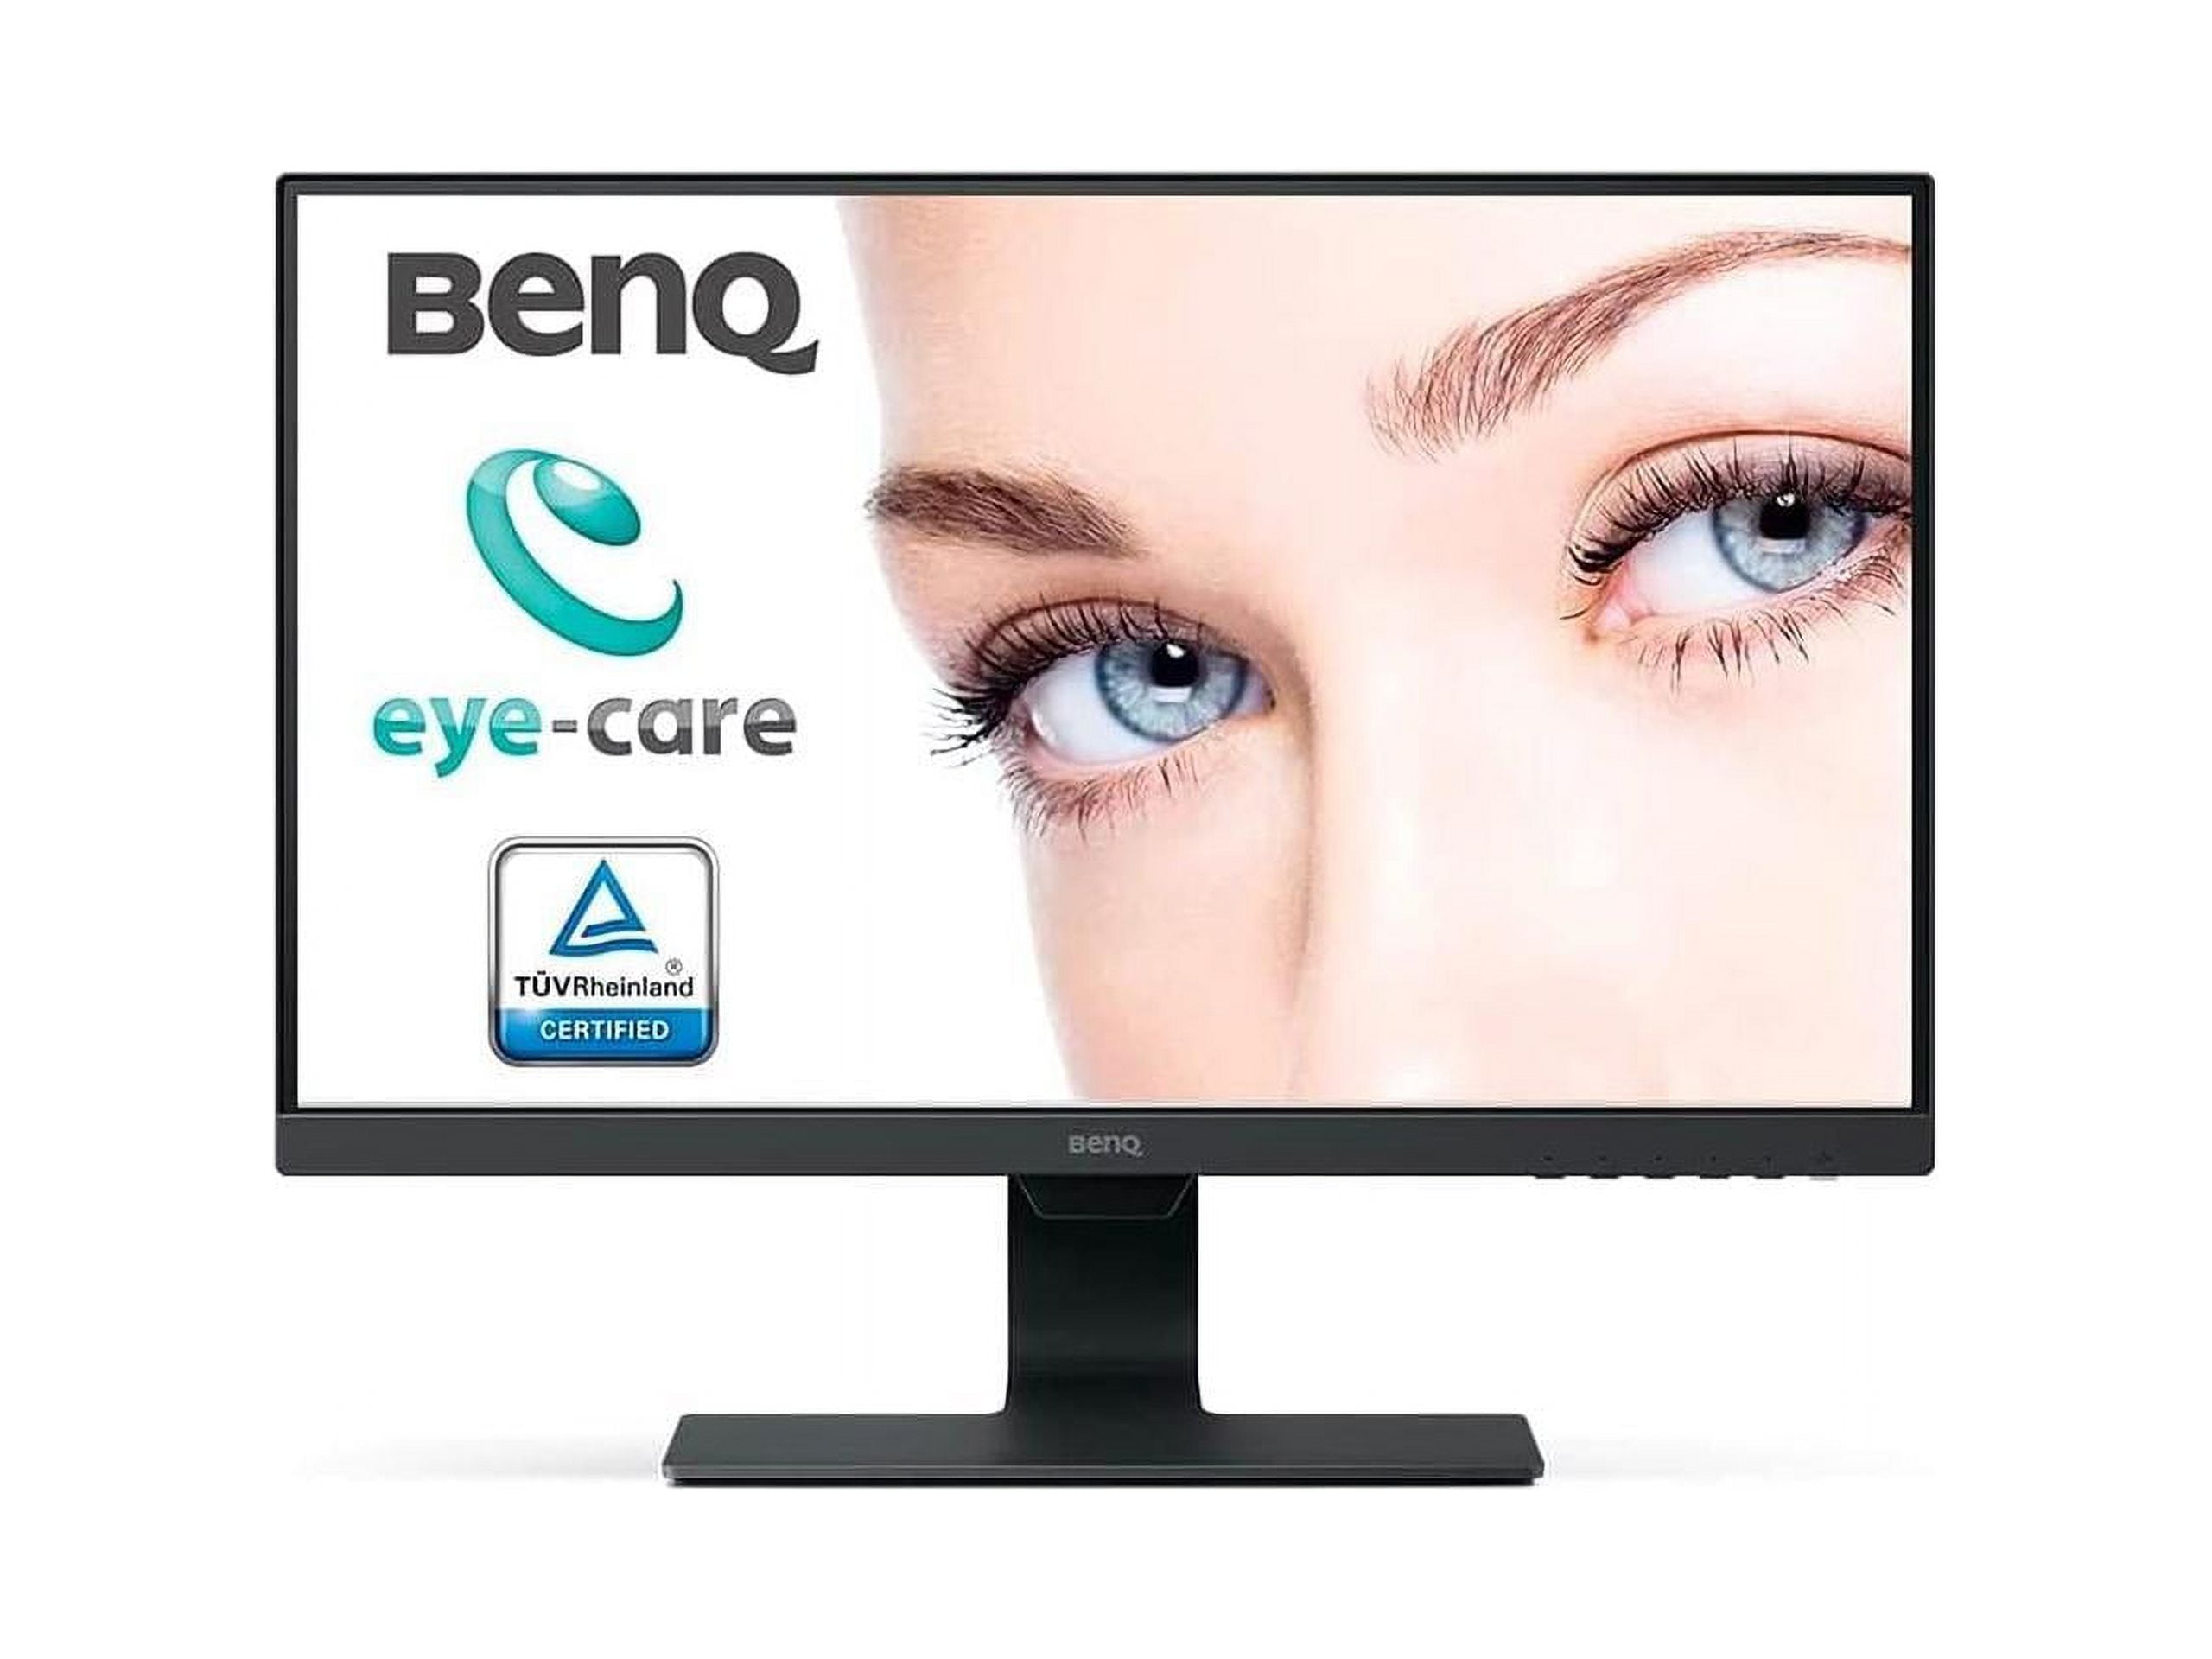 BenQ GW2780 27 Inch IPS 1080P FHD Computer Monitor with Built-in Speakers,  Proprietary Eye-Care Tech, Adaptive Brightness for Image Quality,